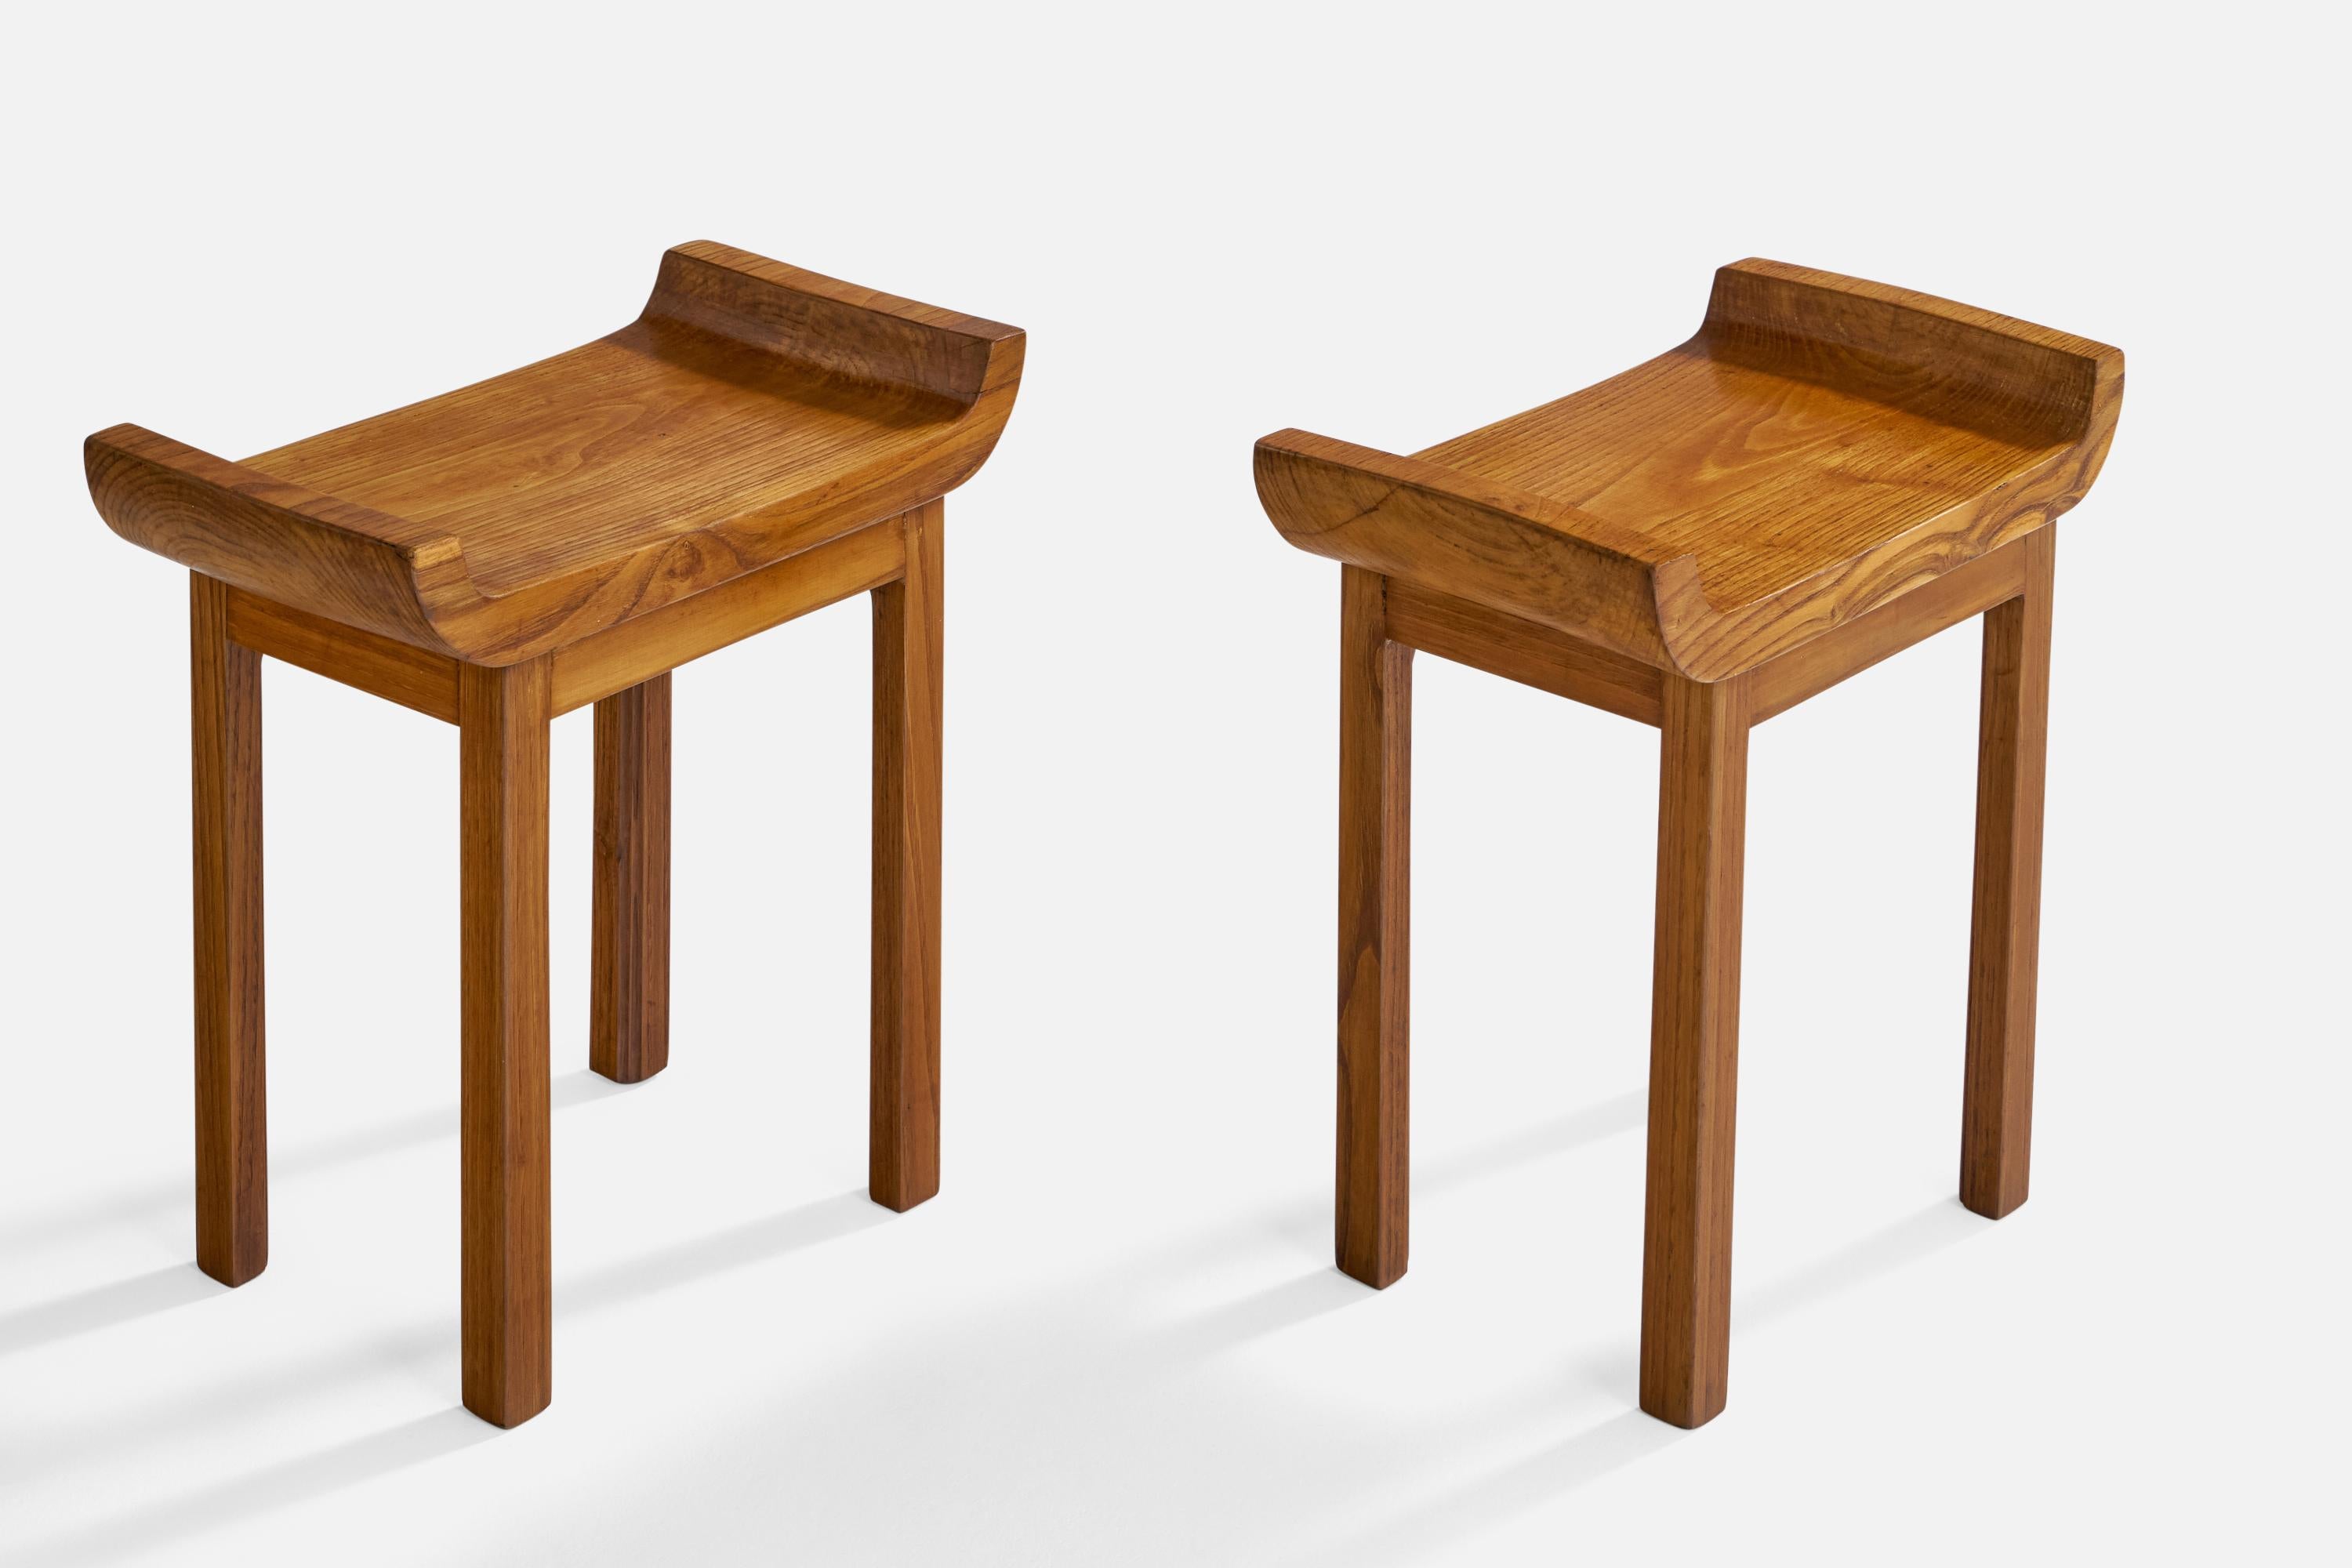 A pair of walnut stools designed and produced in Italy, c. 1930s.

Seat height: 15.75”
